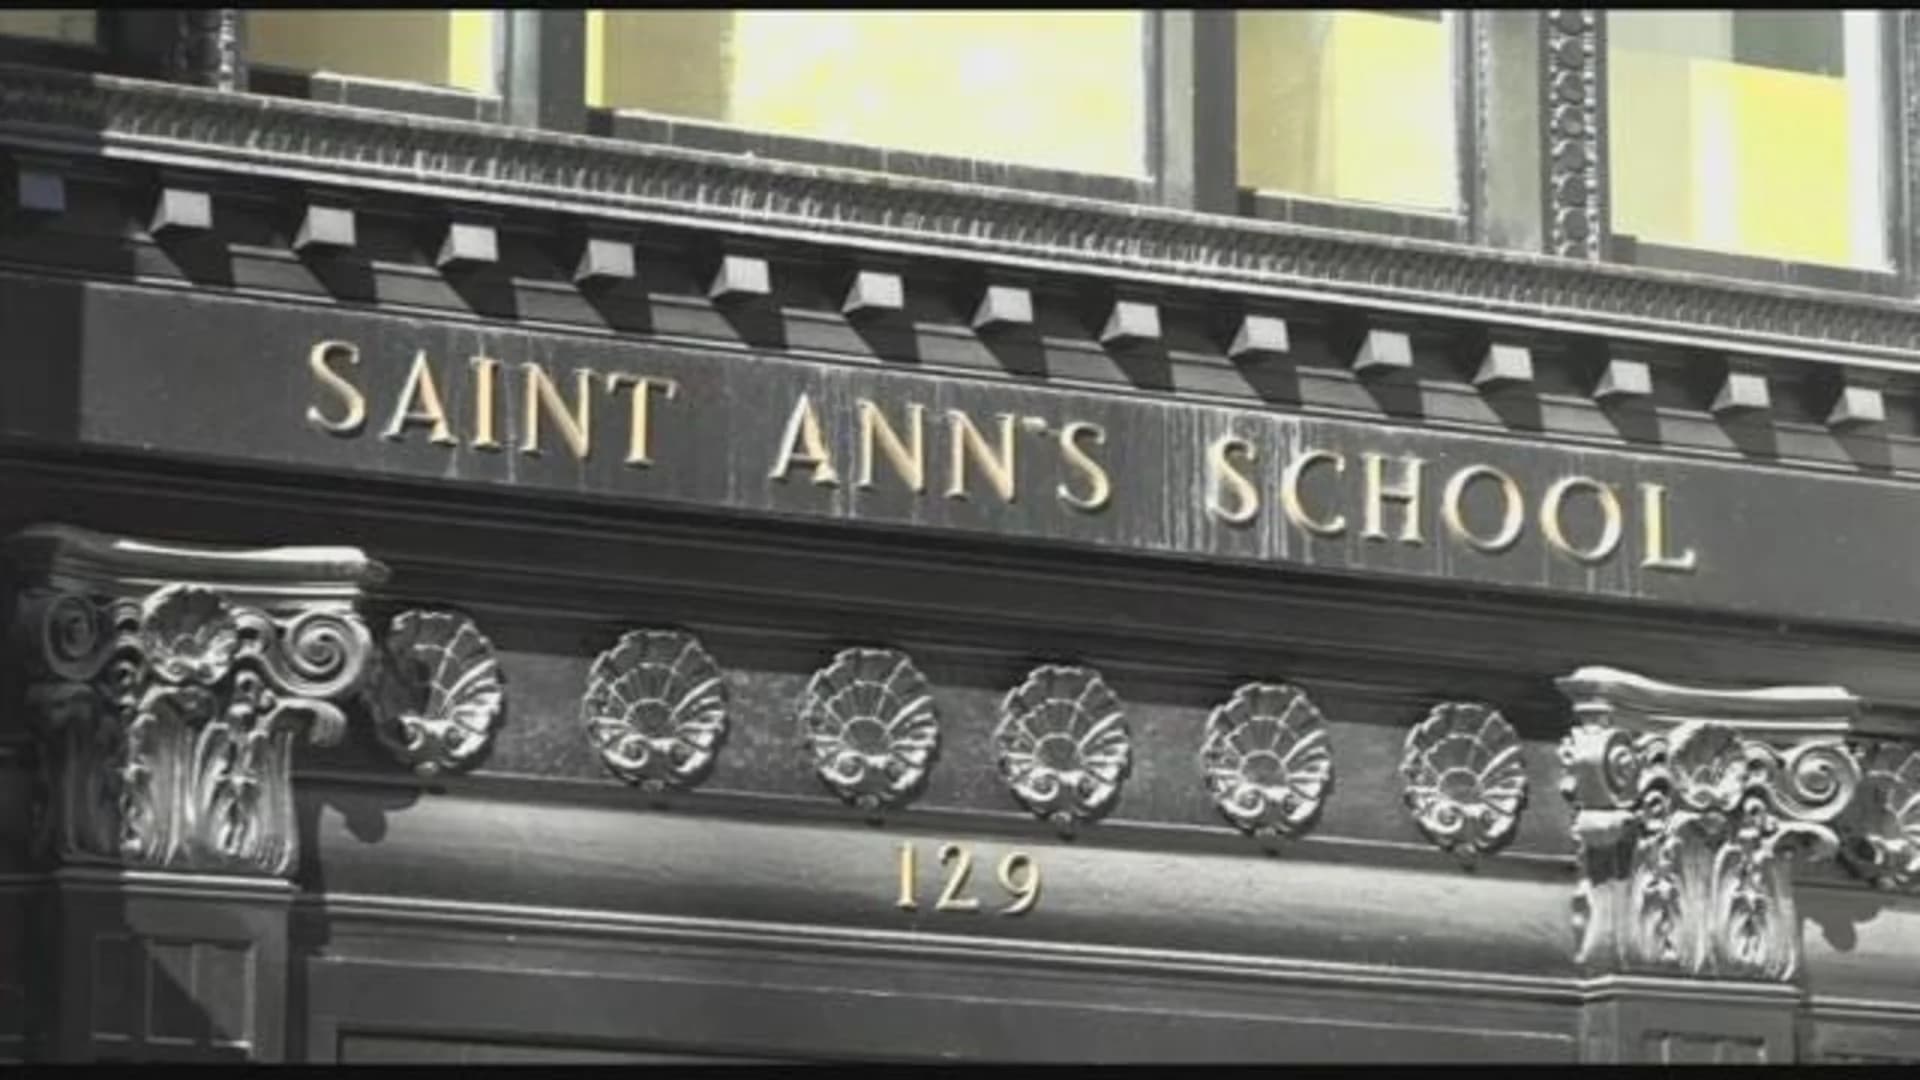 Probe findings allege sexual misconduct at Brooklyn private school